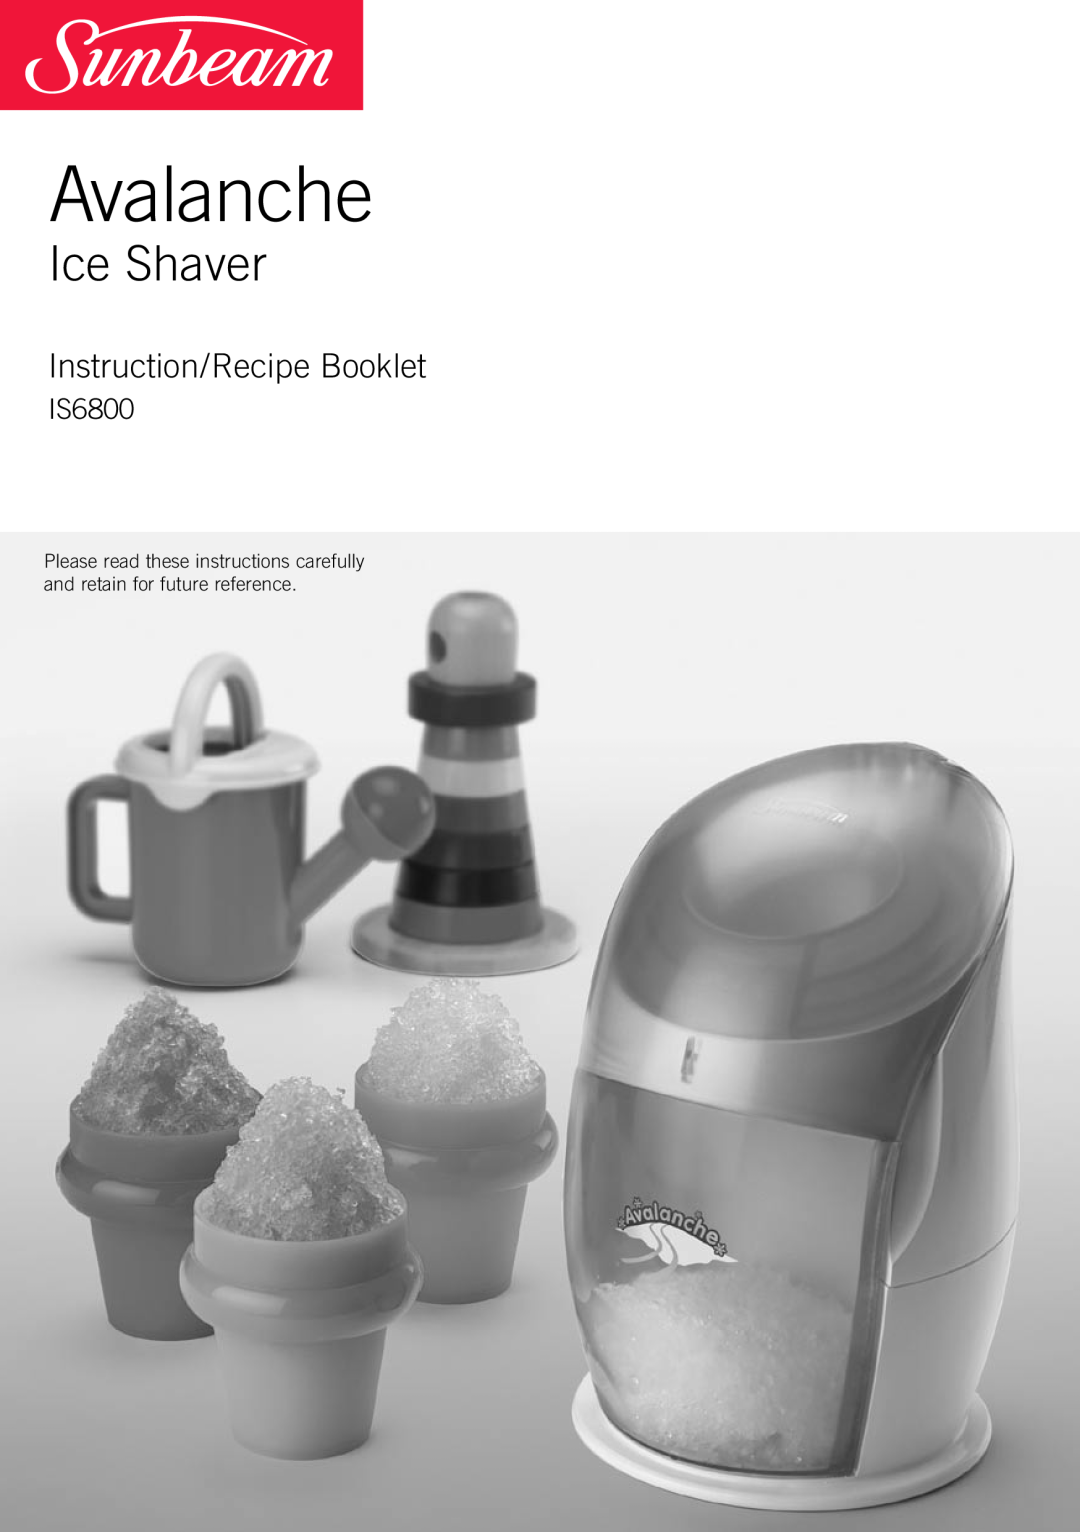 Sunbeam IS6800 manual Avalanche, Ice Shaver, Instruction/Recipe Booklet 